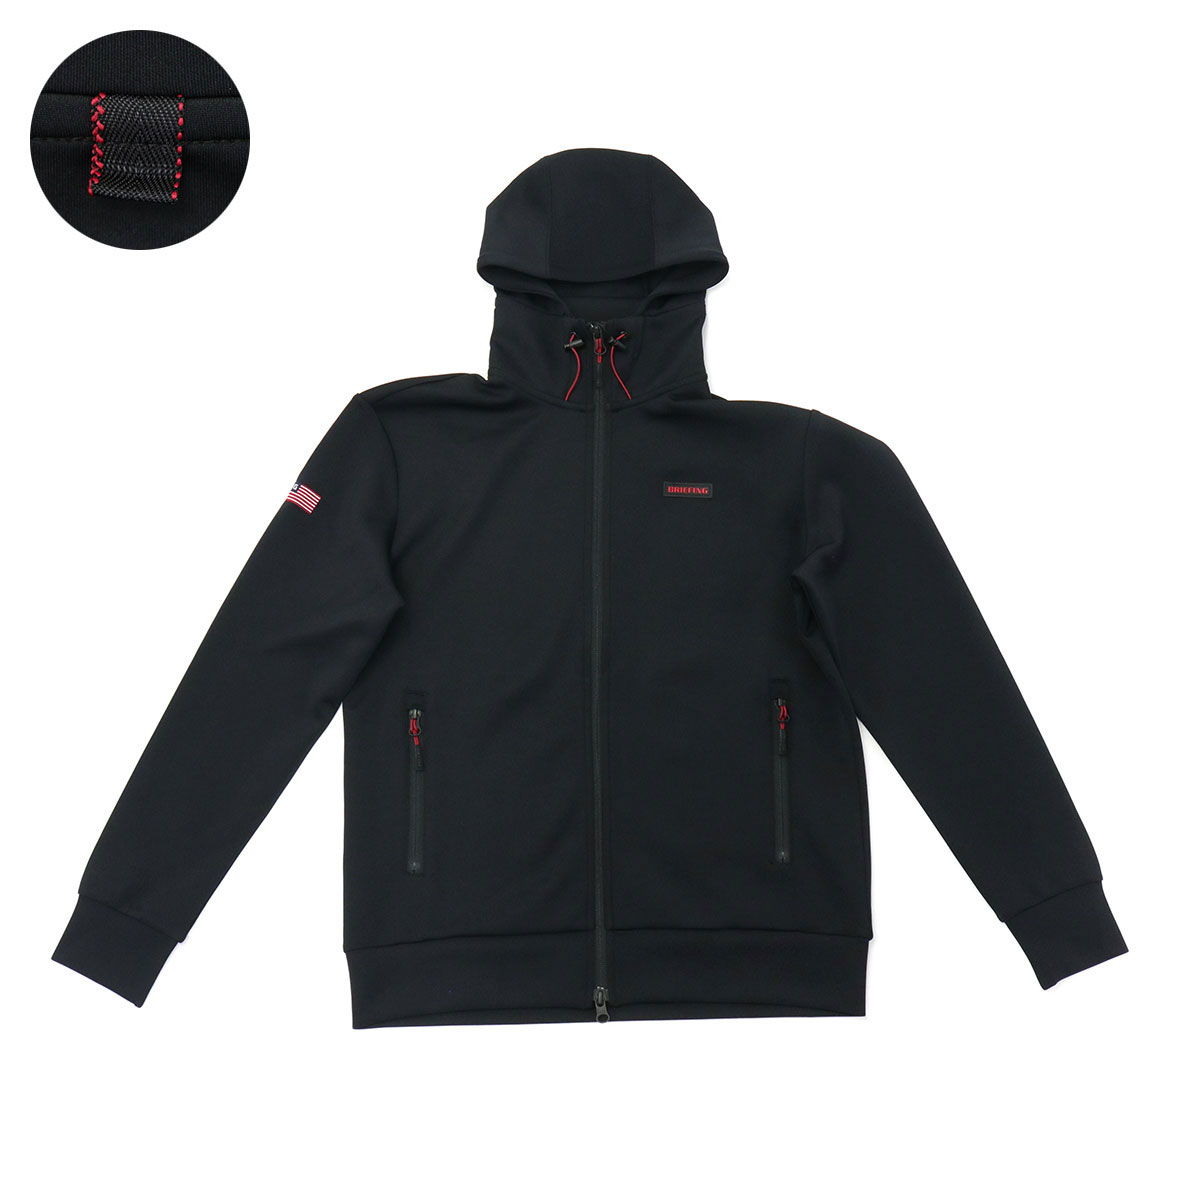 SALE豊富な BRIEFING - BRIEFING GOLF MS 3D LOGO PARKA 紺 Lの通販 by